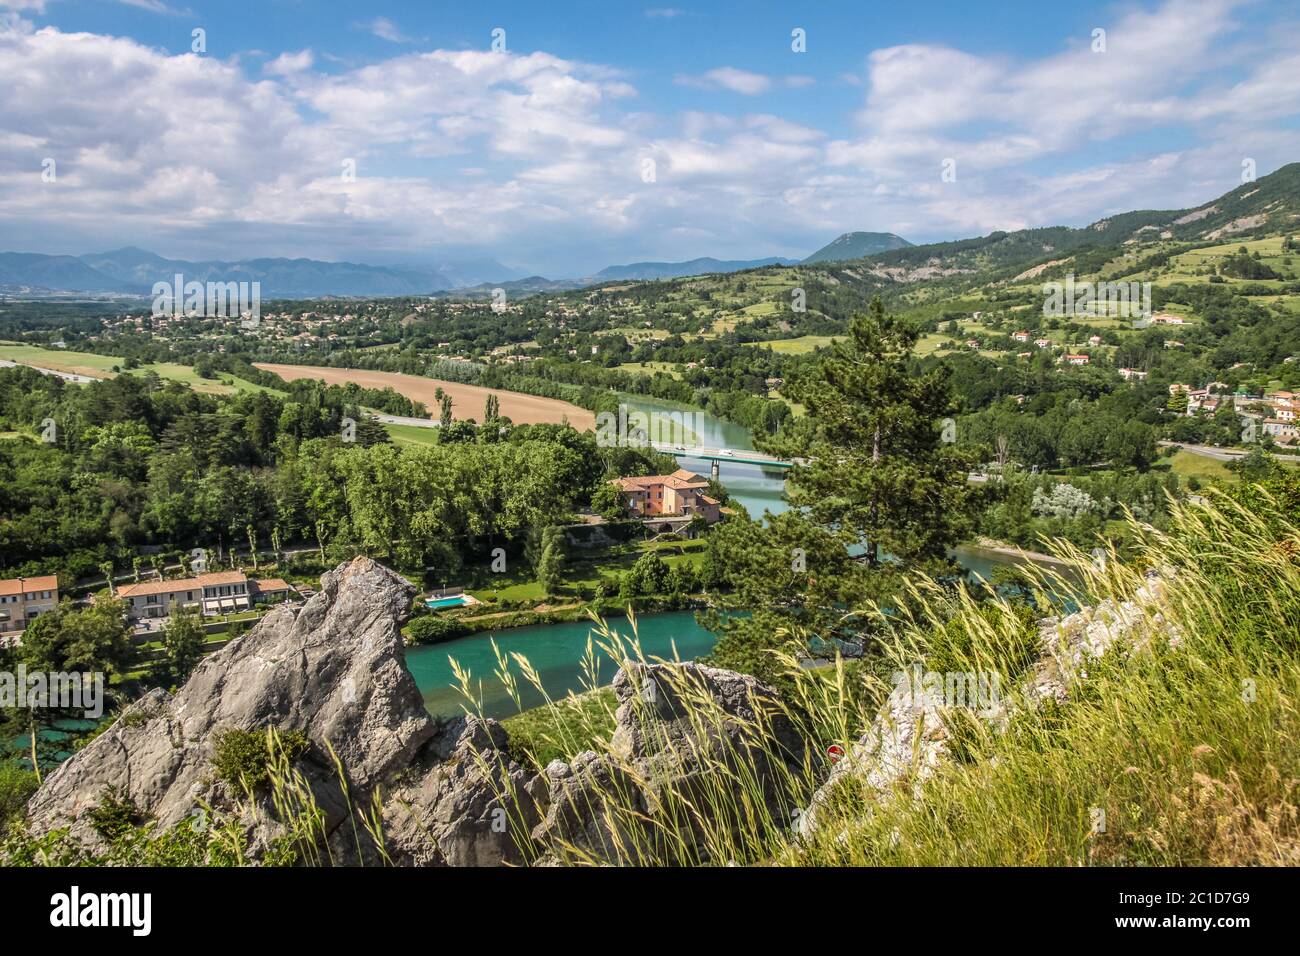 View of the Durance river near the village of Sisteron, Provence, France Stock Photo